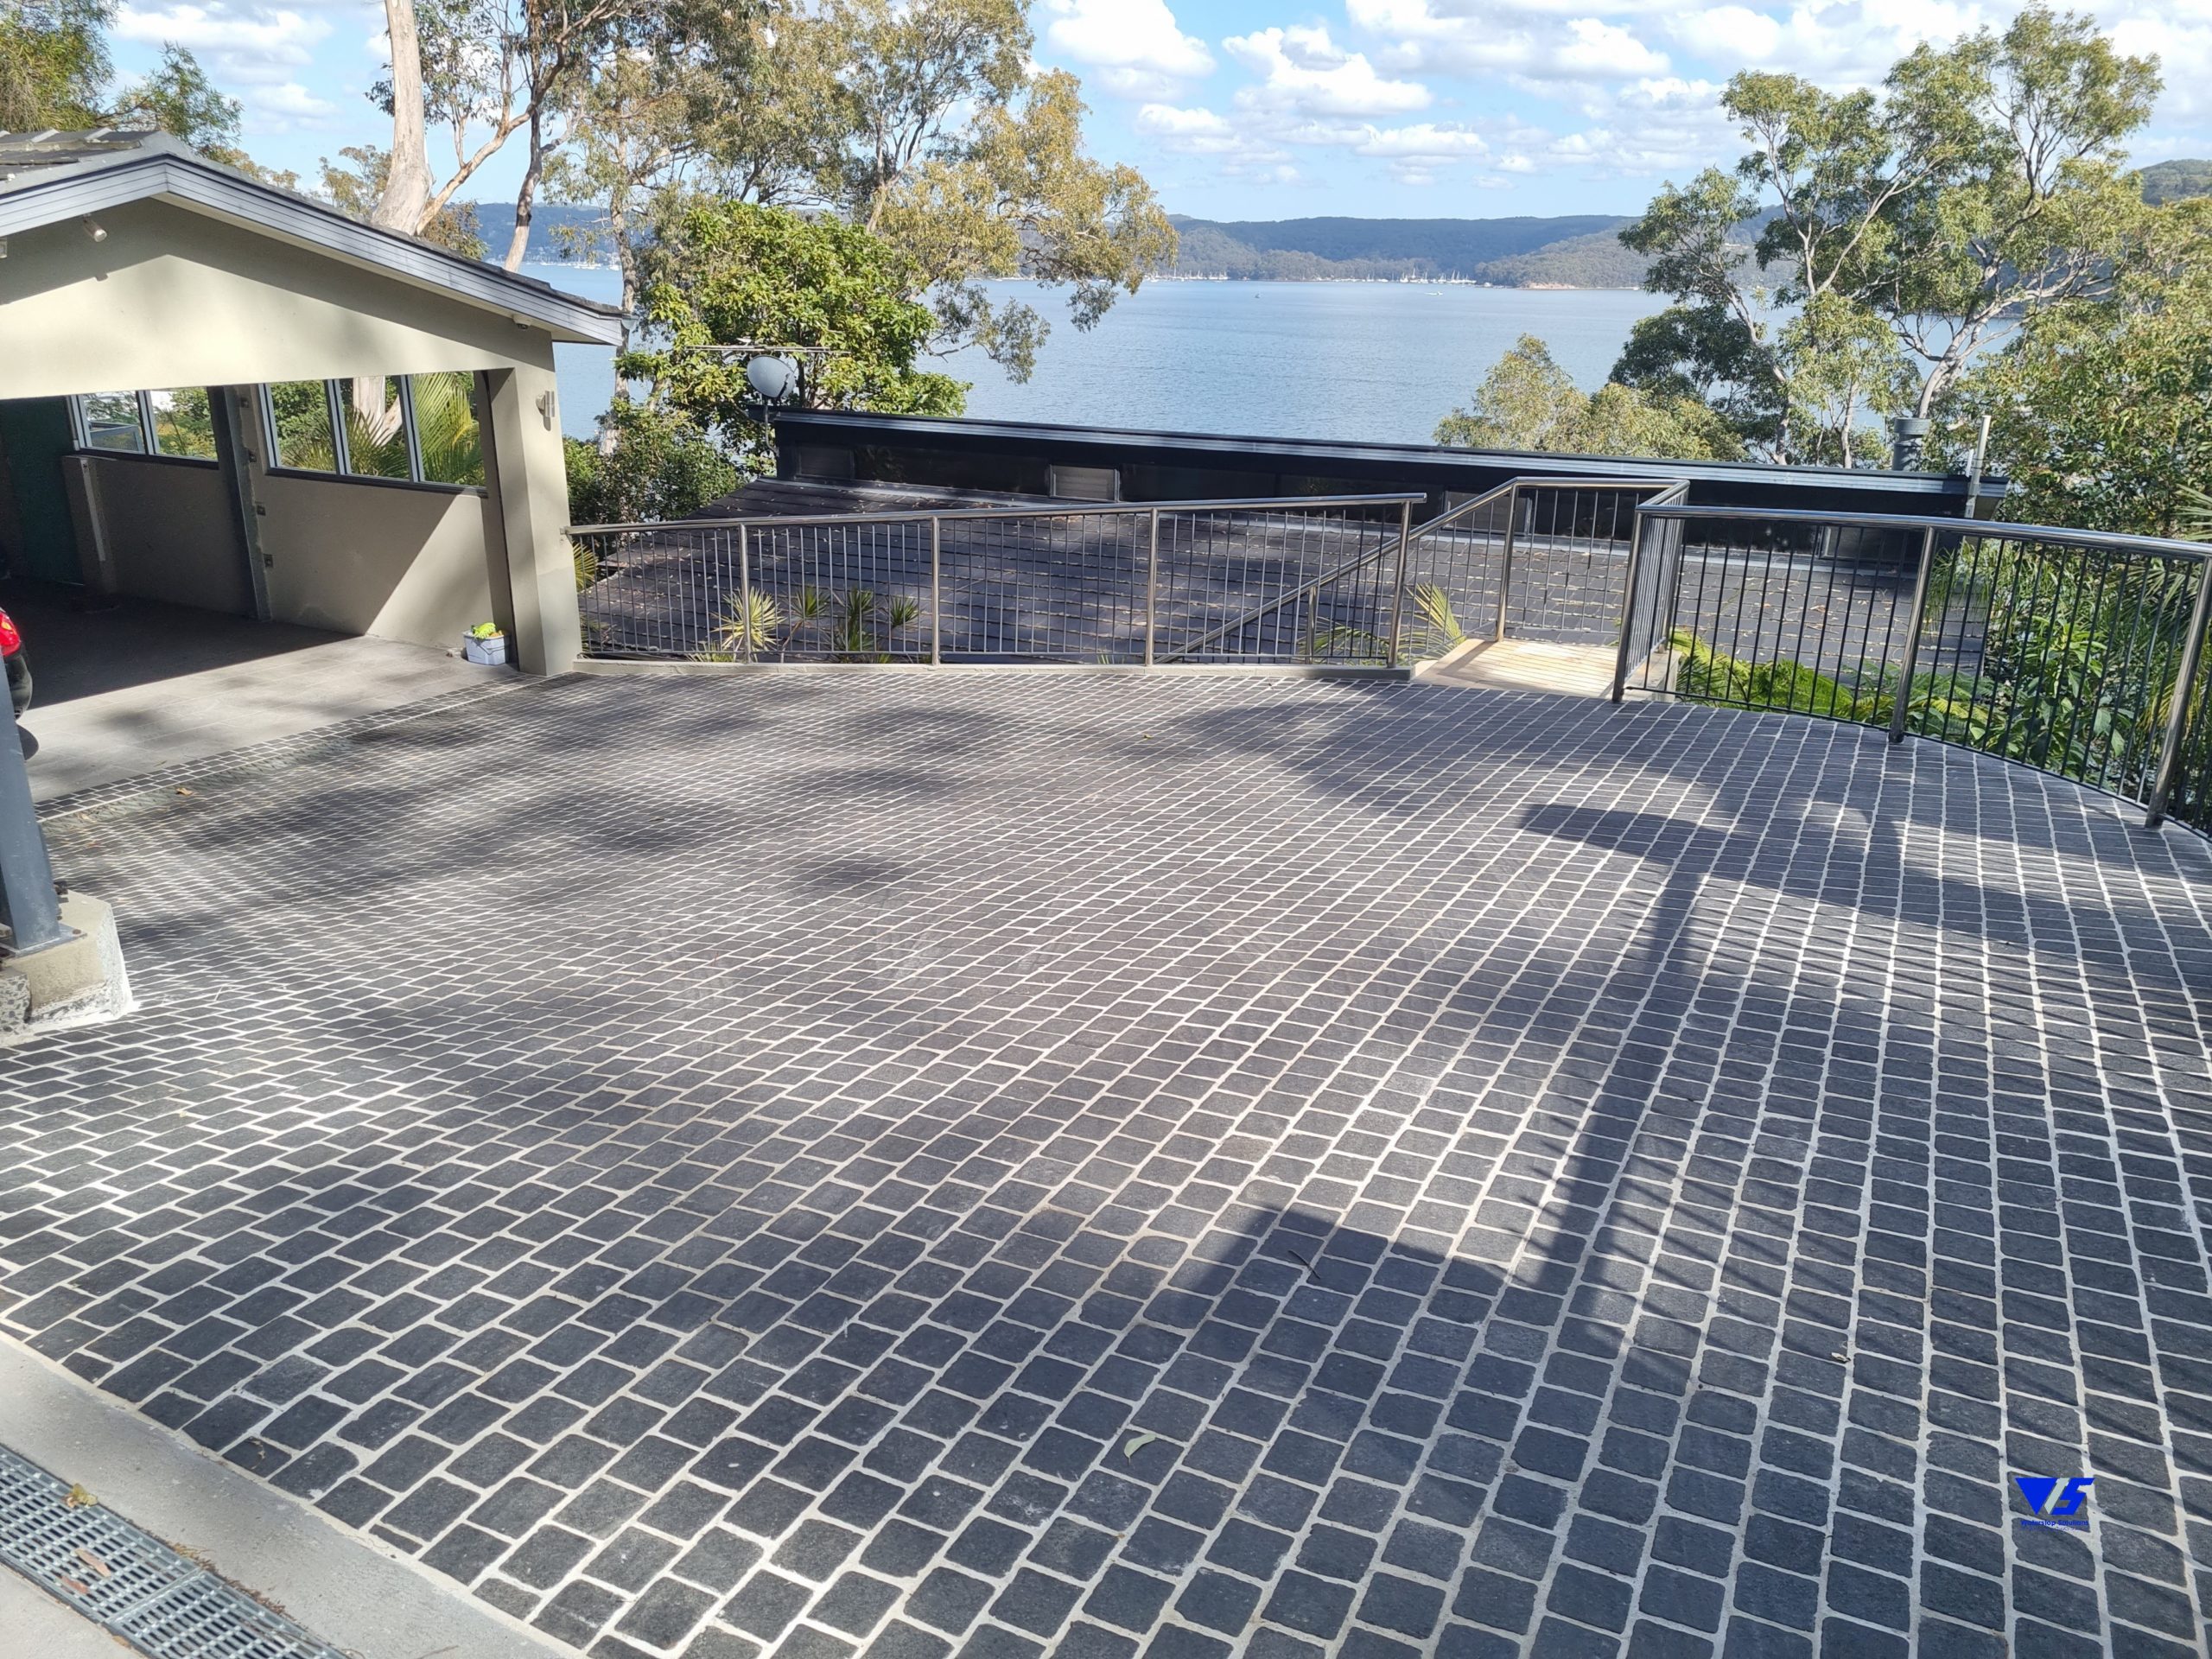 Remedial waterproofing and driveway repair works in Sydney by Waterstop Solutions NSW